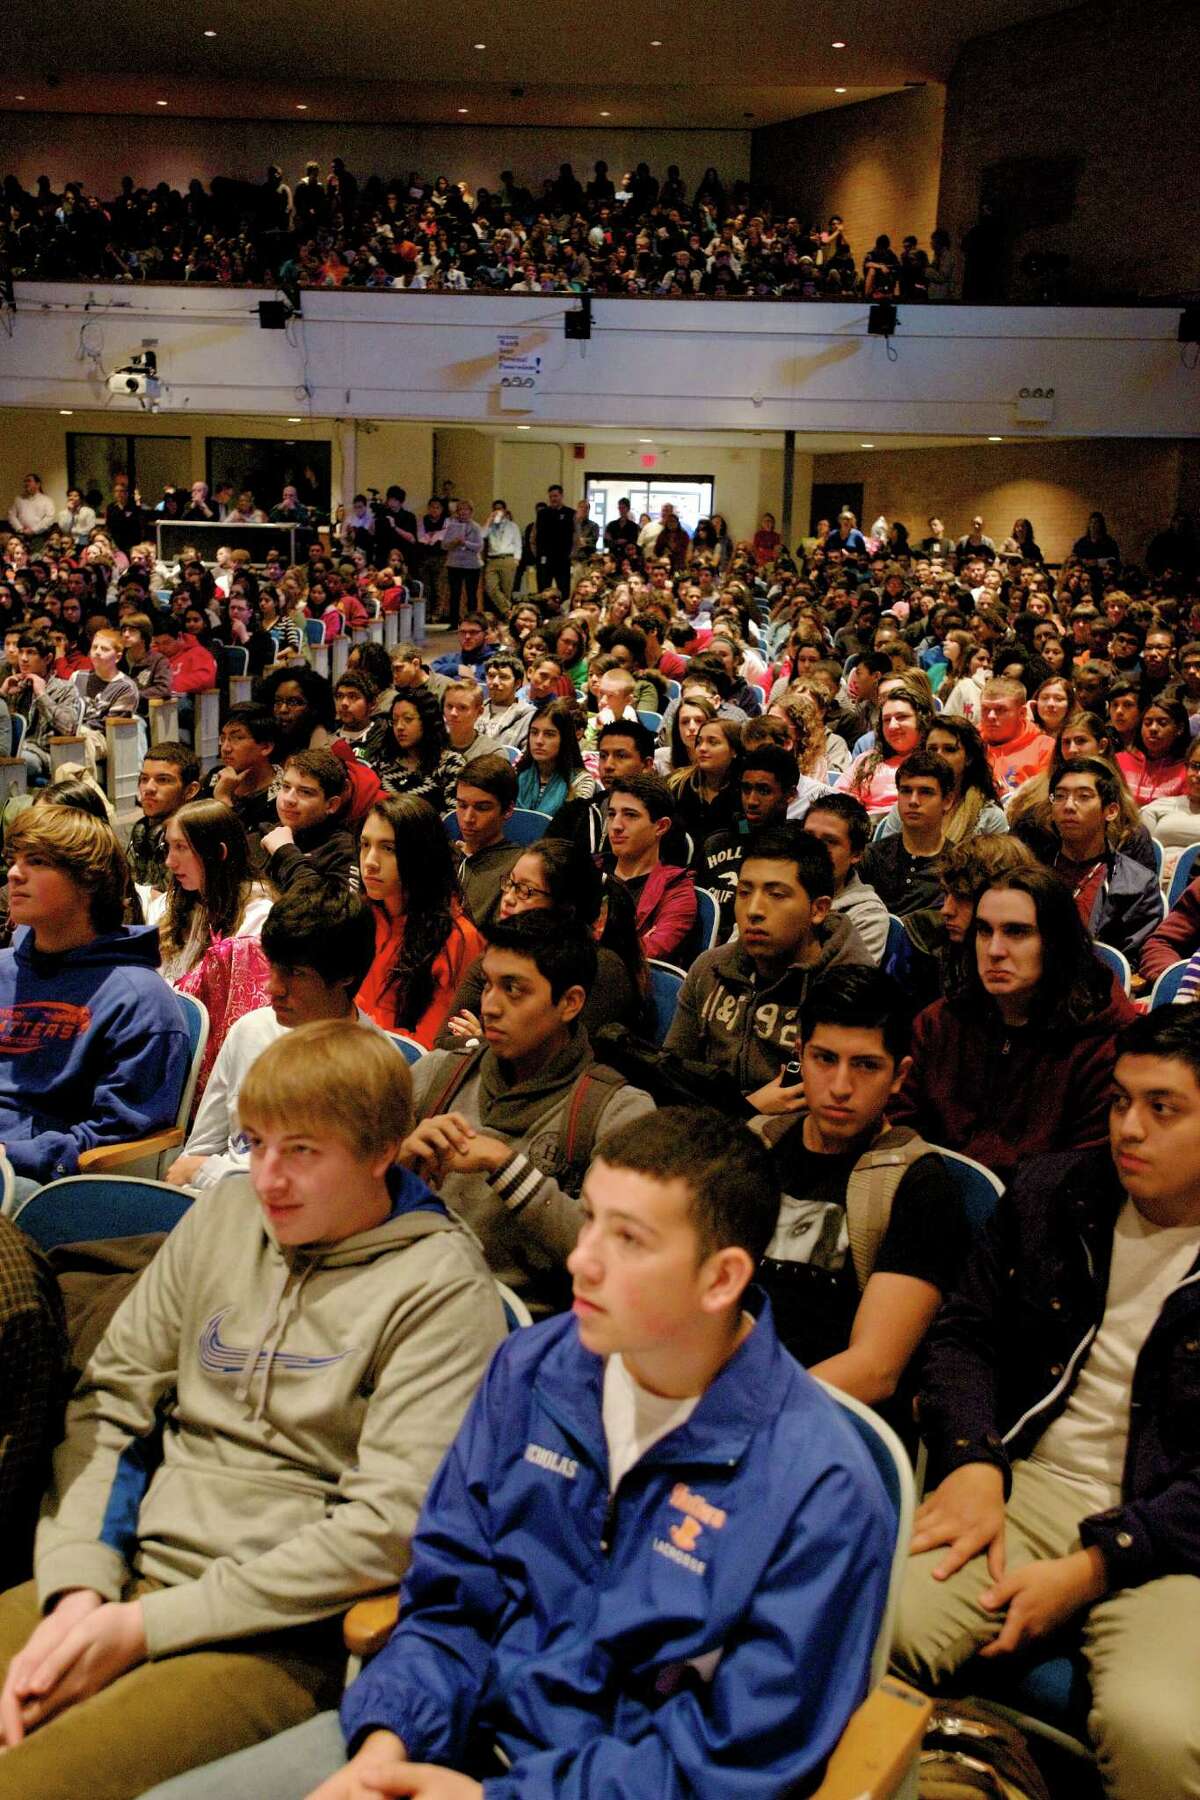 An assembly was held at Danbury High School on Nov. 21, 2013, to celebrate the school winning $100,000 in the State Farm Insurance "Celebrate My Drive" campaign.